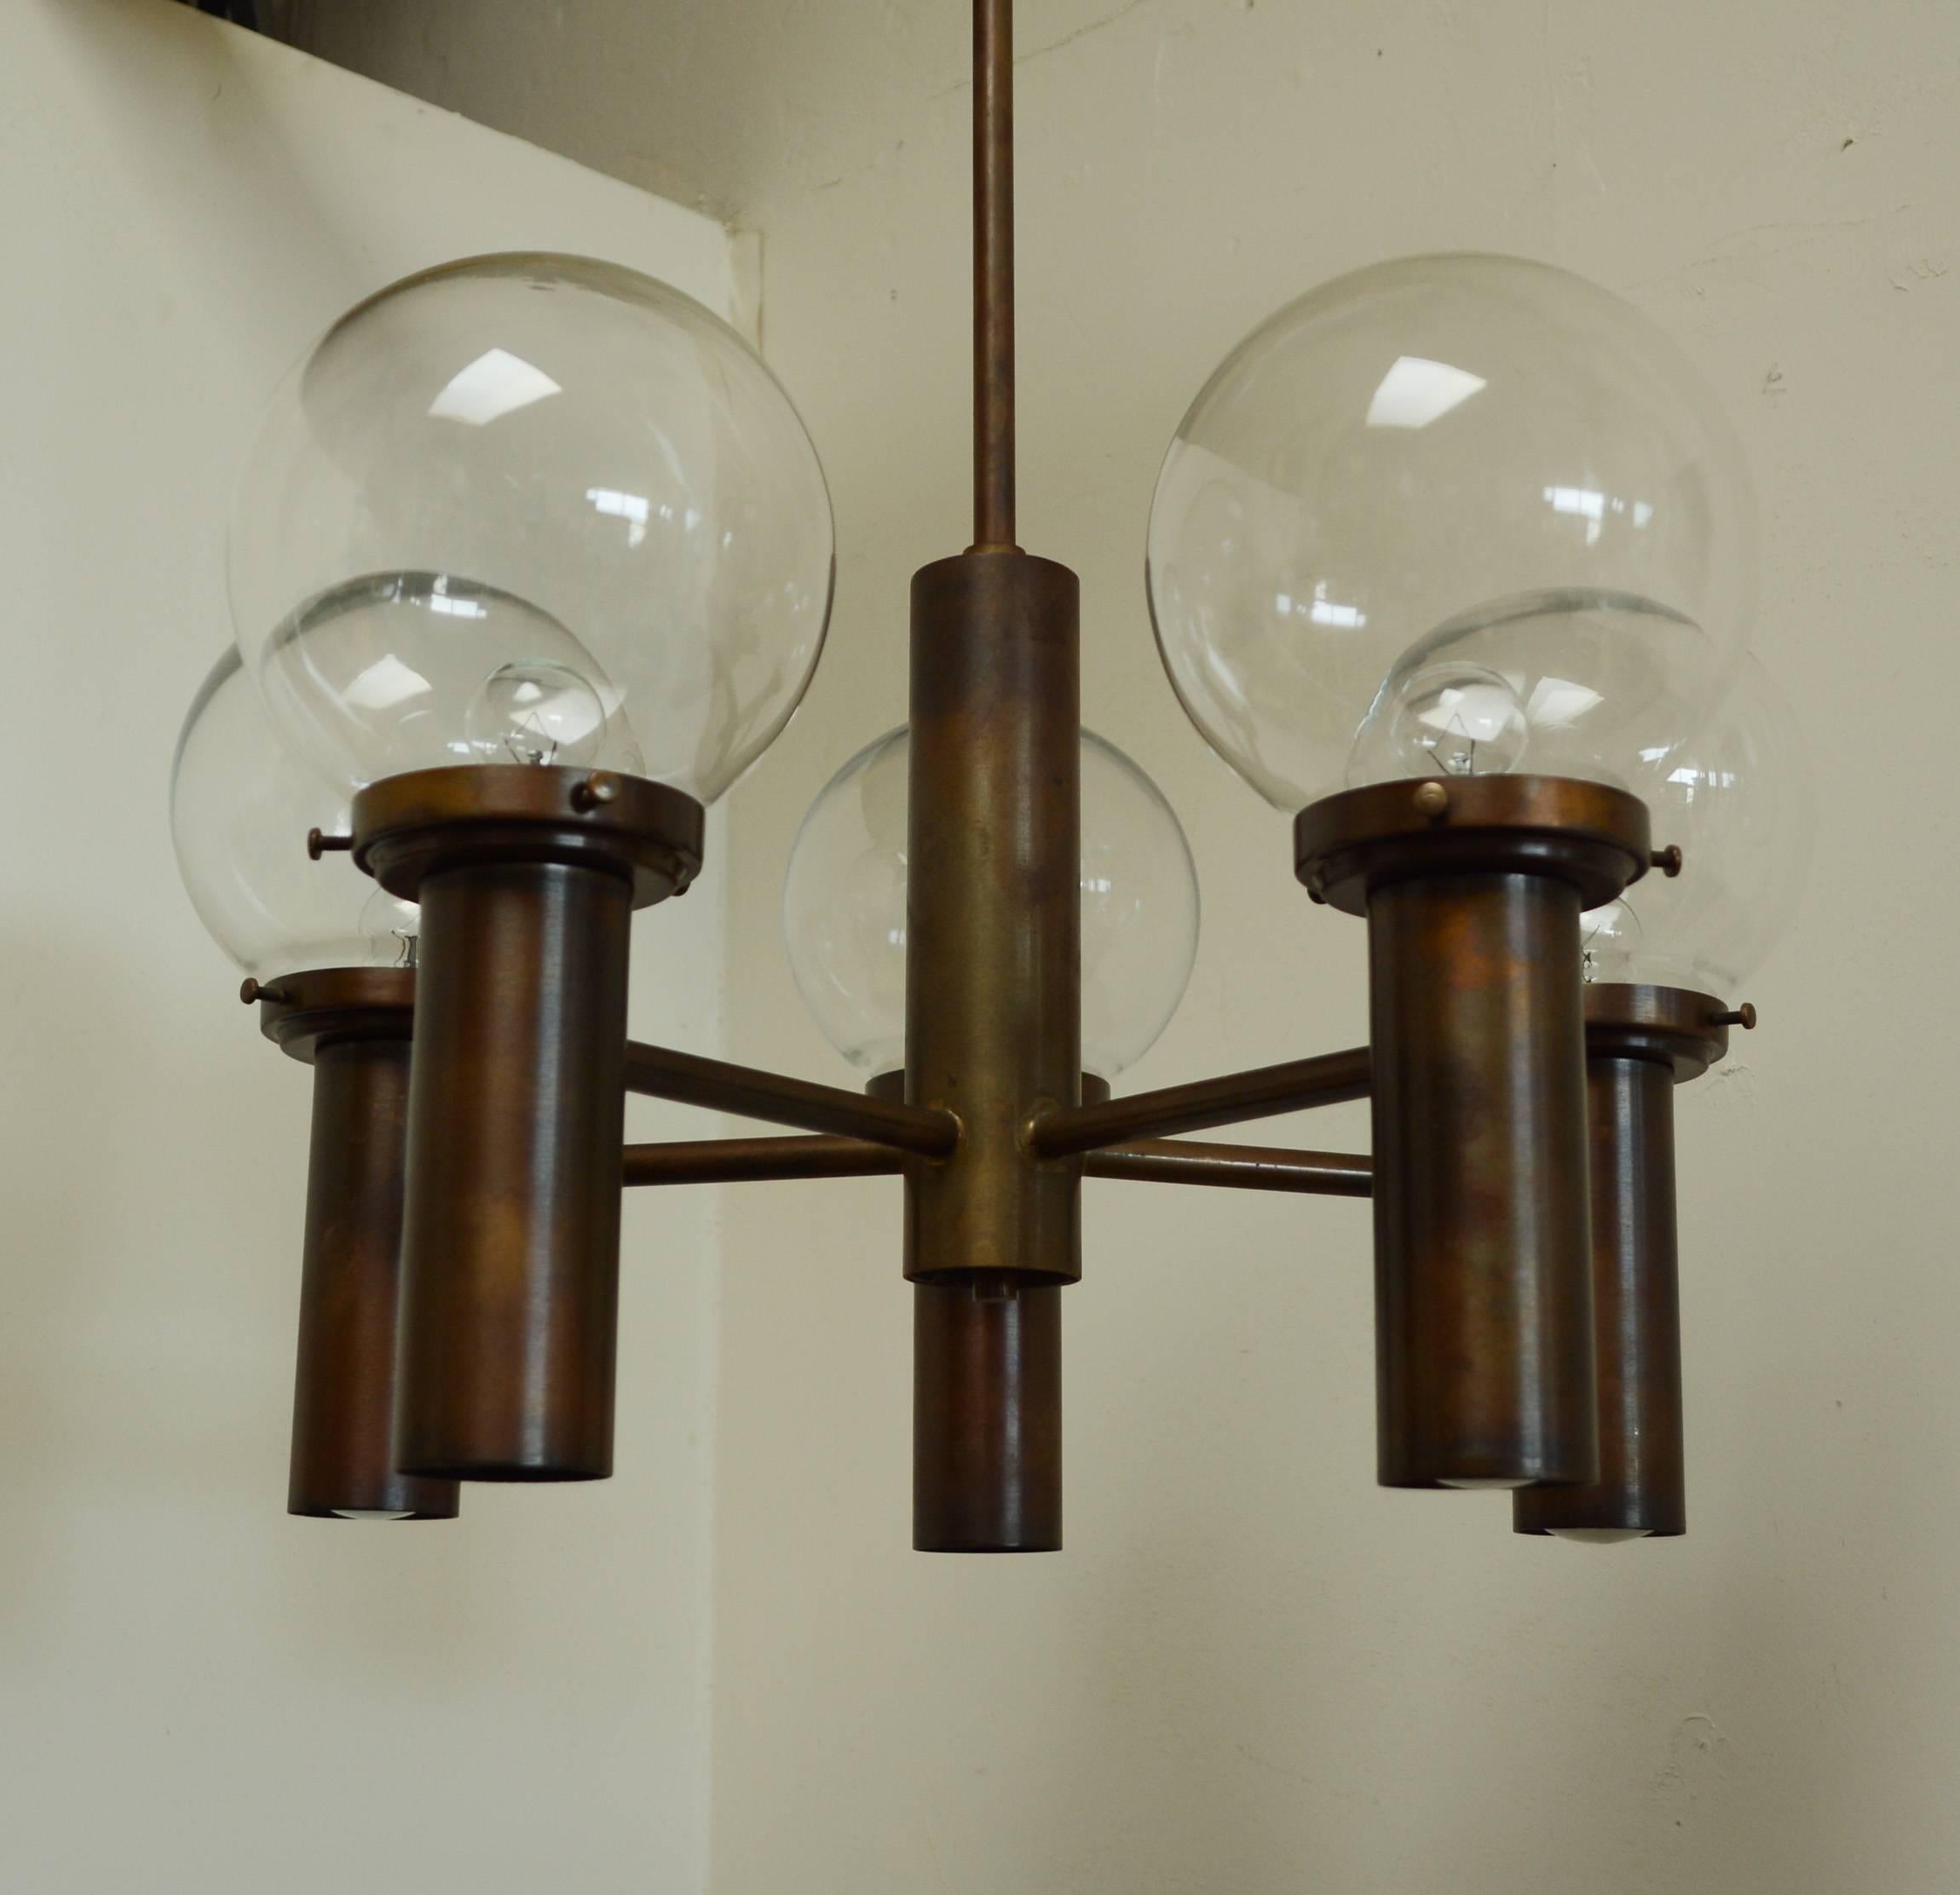 Stuart Barnes designed chandelier for Robert Long. This chandelier has an oiled brass finish. This chandelier has ten lamps, five up and five down. There is a switch that allows either the up or down lights to be on or both. The height can be